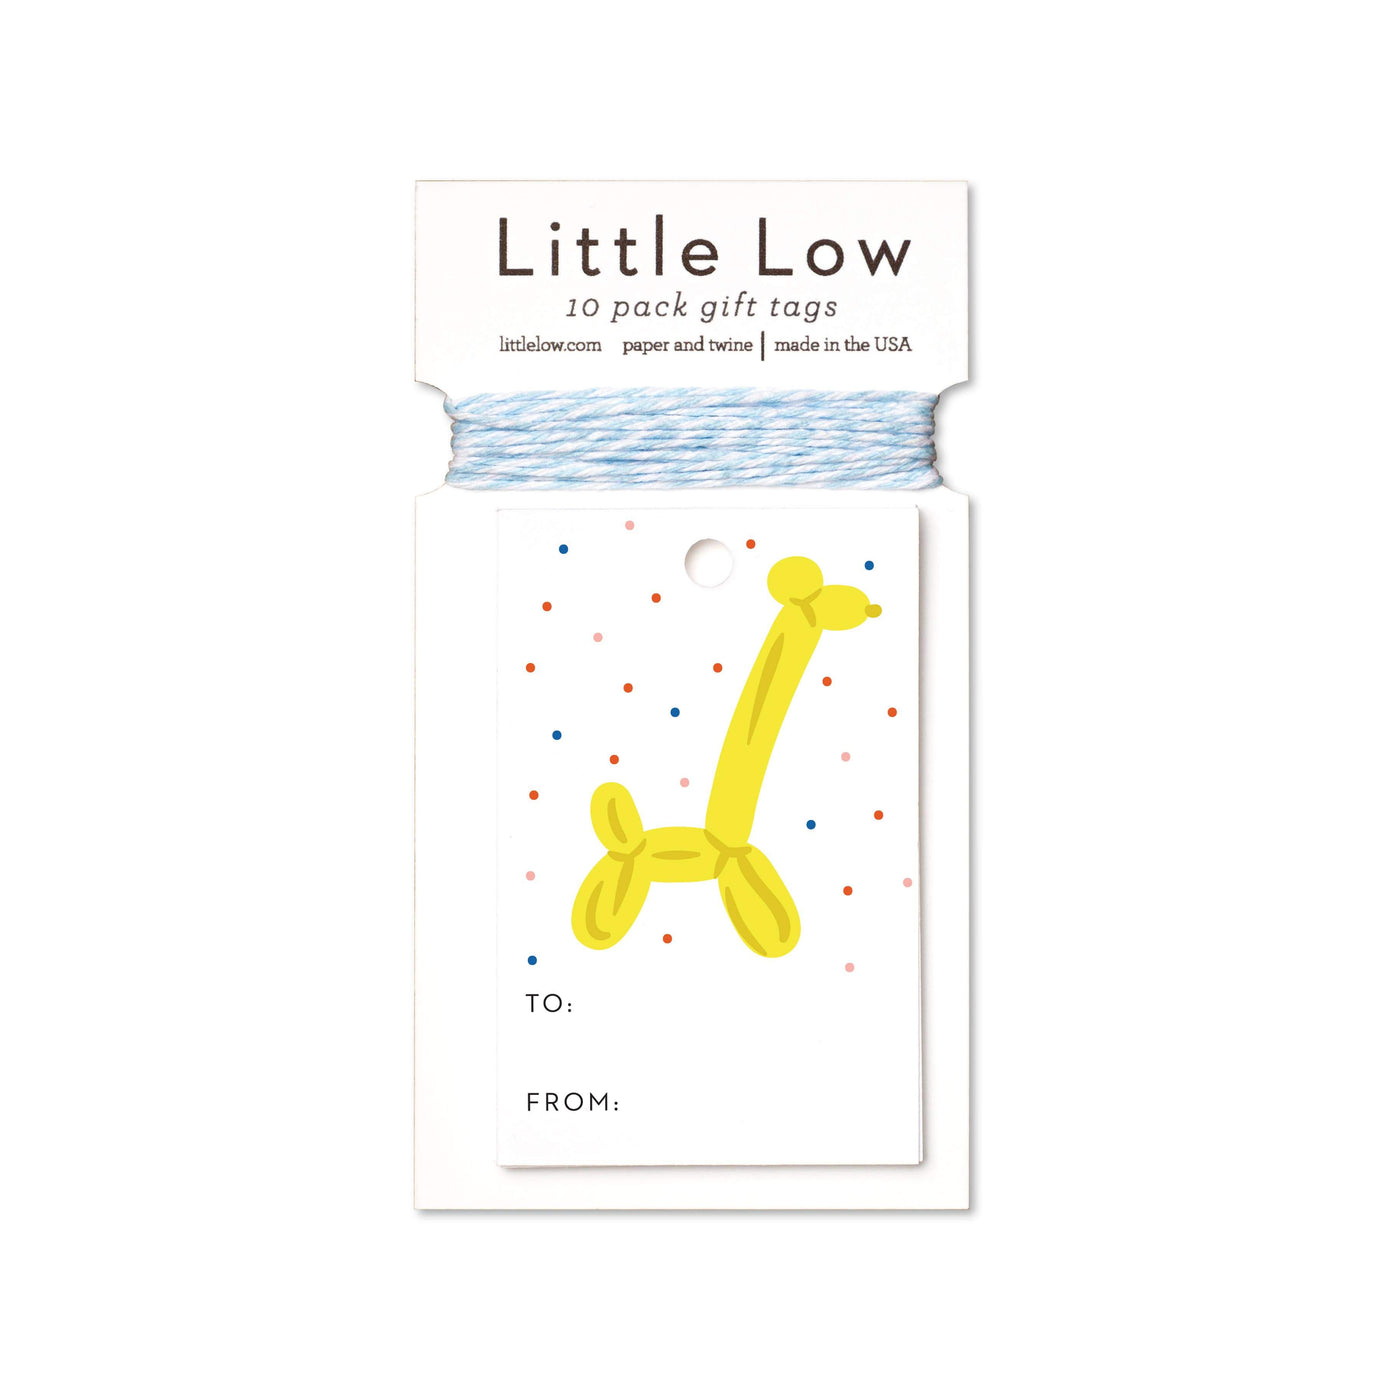 Balloon giraffe gift tags featuring a yellow balloon giraffe printed on white stock including a generous amount of twine